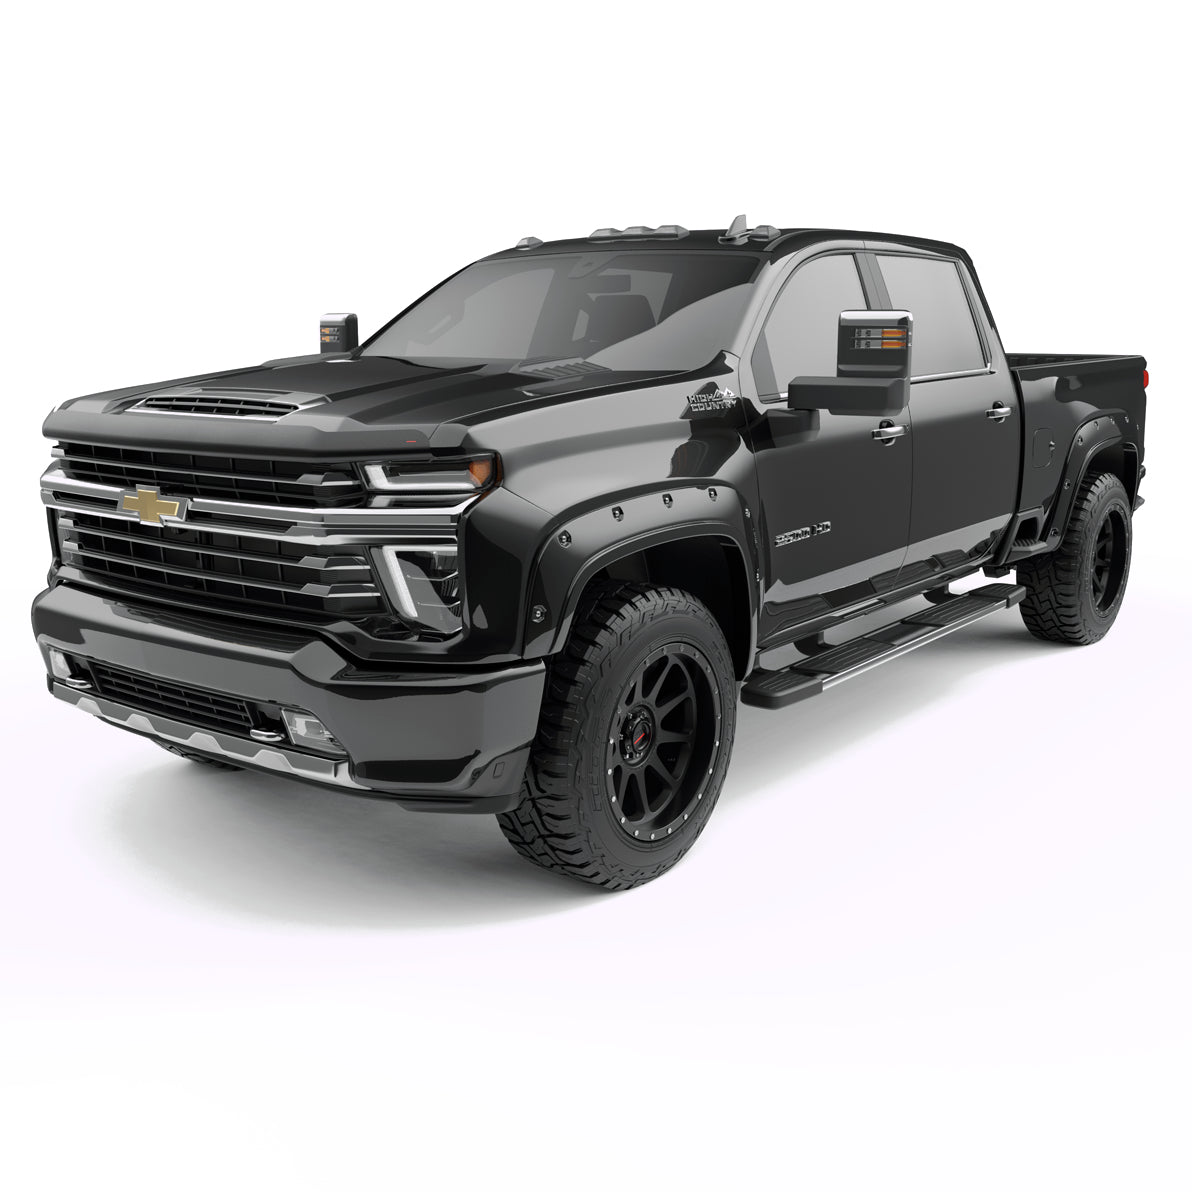 EGR 2020-2023 Chevrolet Silverado 2500 3500 HD 2 & 4 Door Extended Cab Crew Cab Standard Cab Pickup Traditional Bolt-on look Fender Flares set of 4 Painted to Code Black 791884-GBA